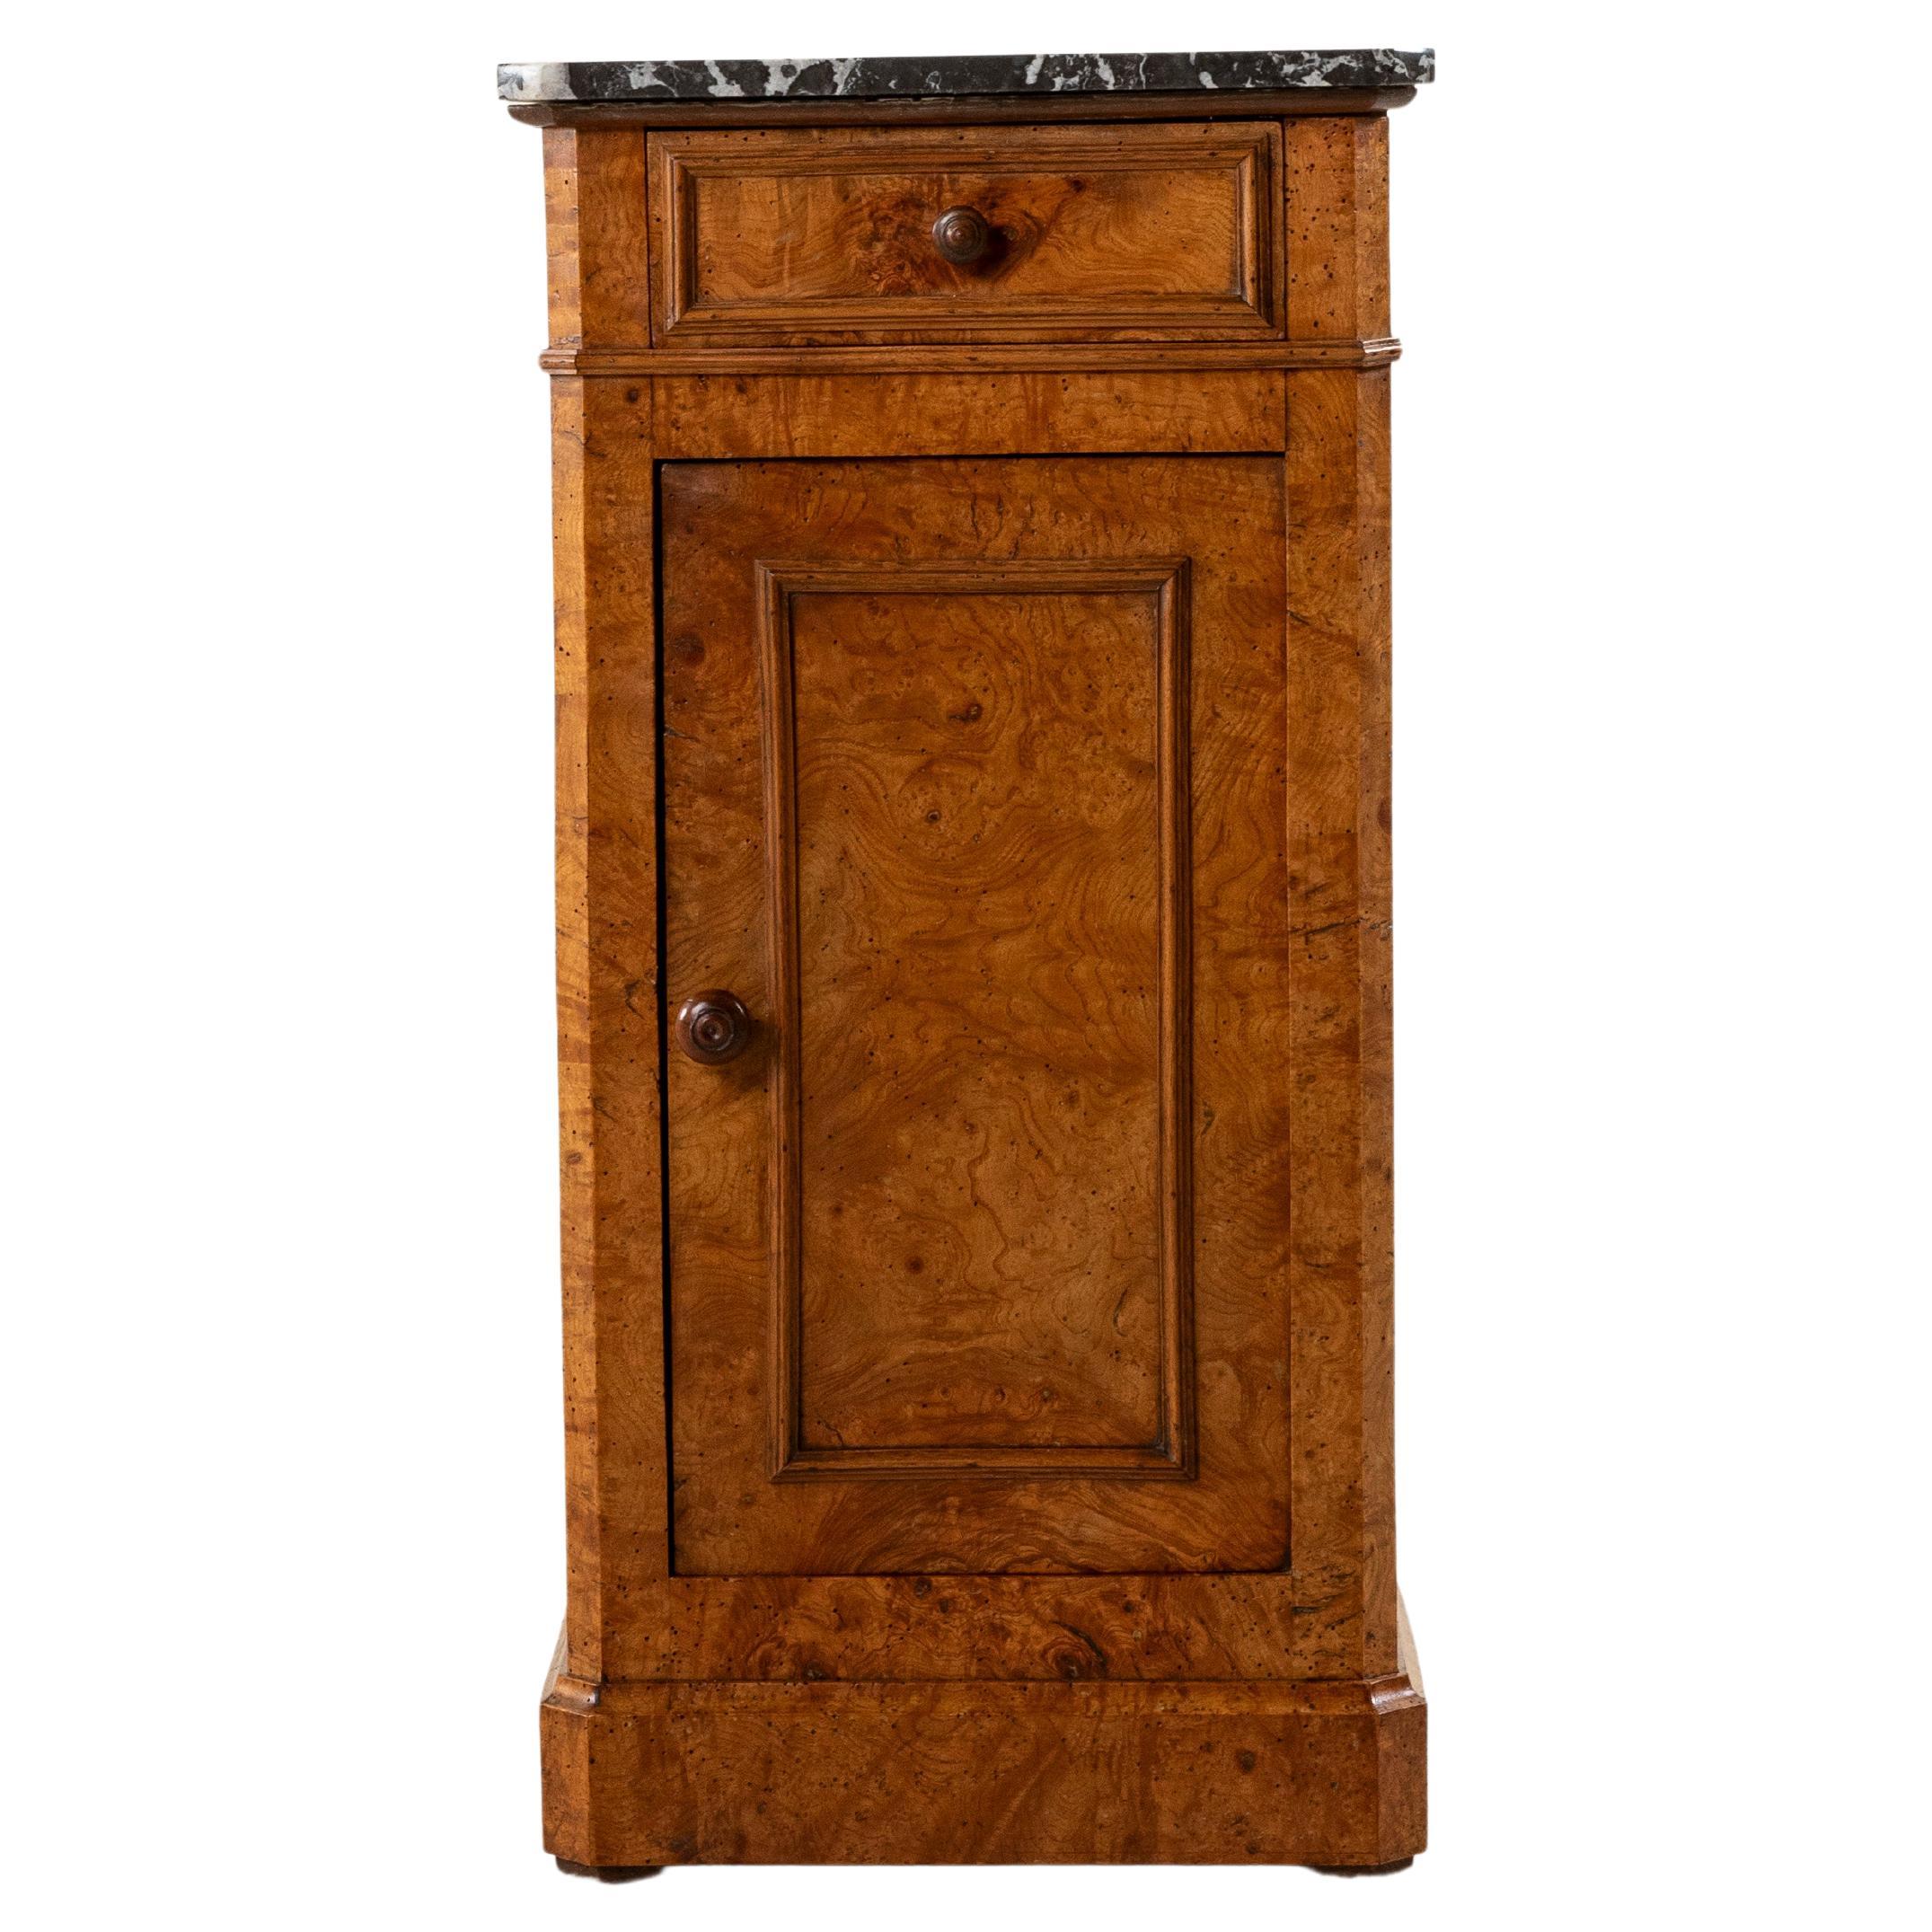 Early 19th Century French Restauration Period Burl Elm Nightstand, Marble Top